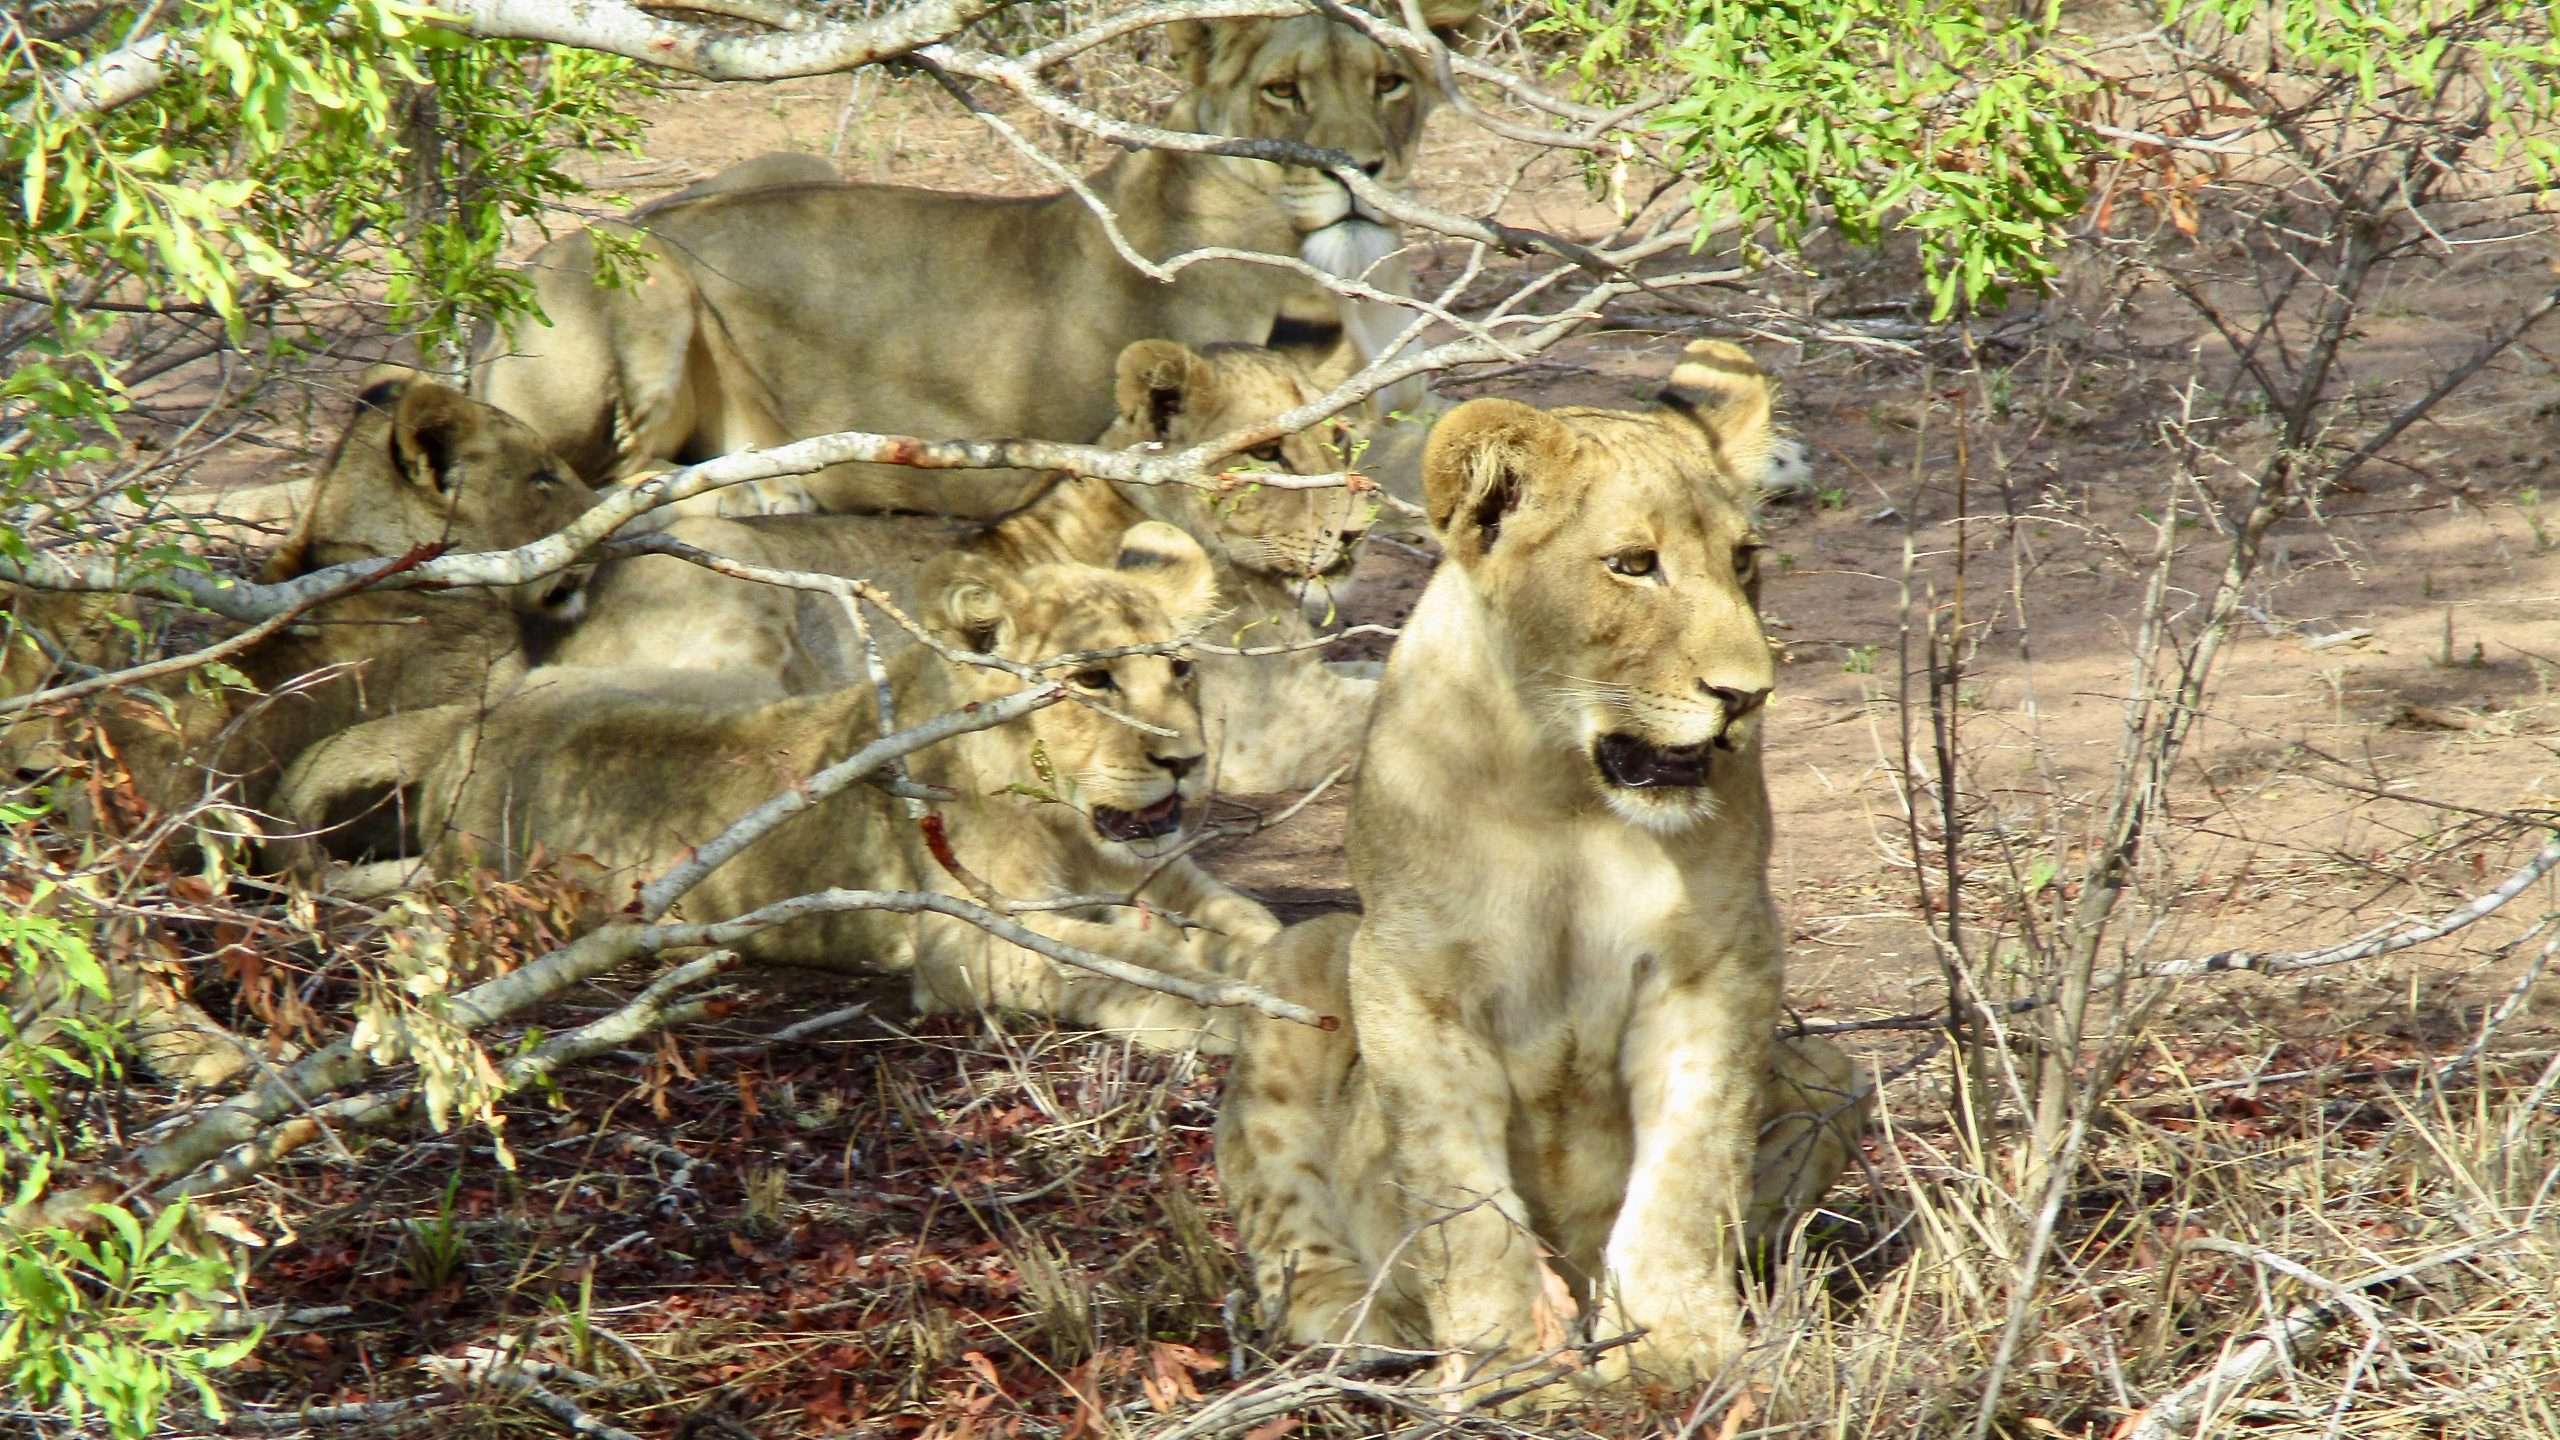 Lions - My African Safari - Thornybush Nature Reserve South Africa